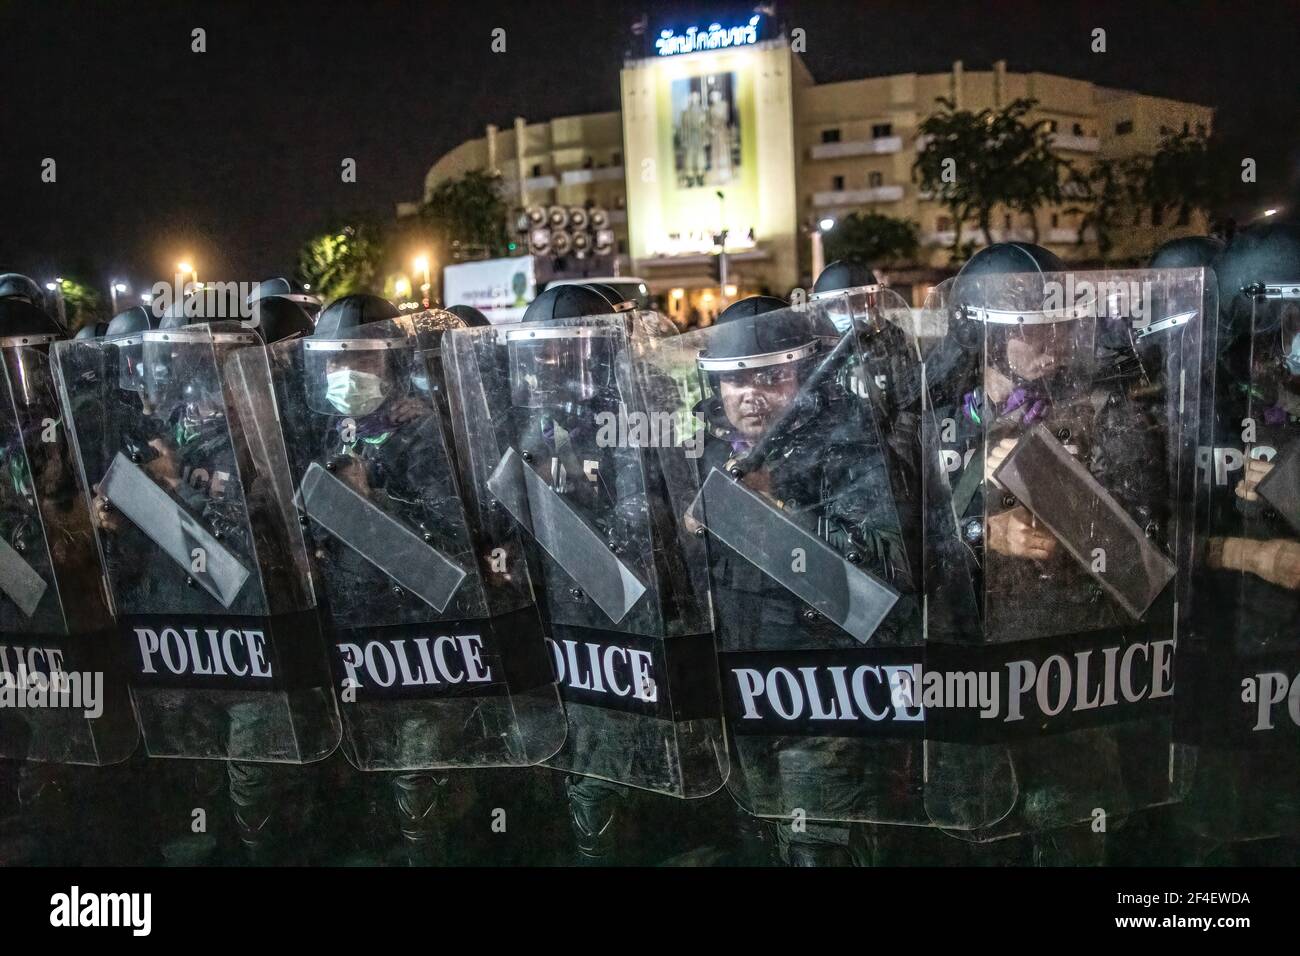 Riot police officers stands guard behind their shields during an anti-government demonstration in Bangkok. Thousands of pro-democracy protesters gathered near the Grand Palace in Sanam Luang demanding the resignation of Thailand Prime Minister and the reform of the monarchy. The protesters also denounced the use of the Lese Majeste law under the section 112 of the penal code. The protest organized by REDEM (Restart Democracy) ended up with several clashes, the use of water cannon, tear gas and rubber bullet, which had left several injured. (Photo by Geem Drake / SOPA Images/Sipa USA) Stock Photo